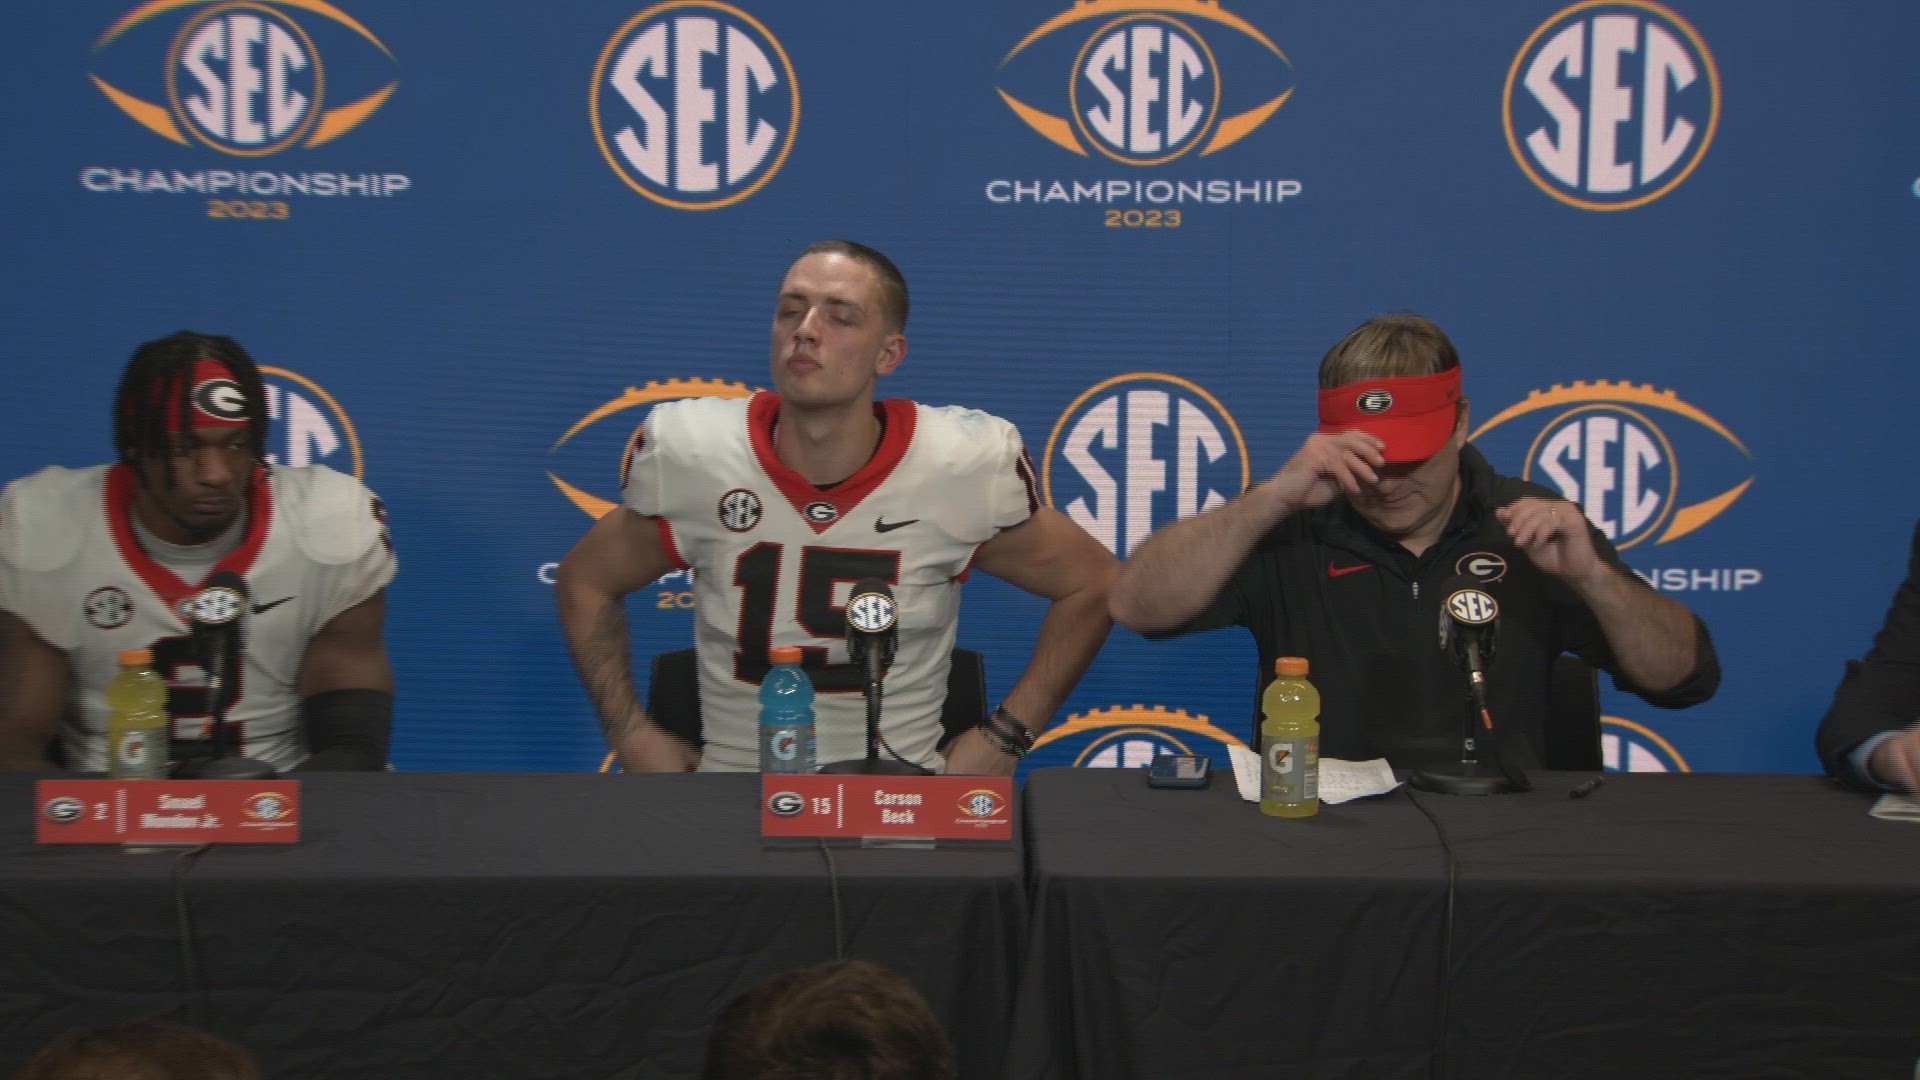 Across the press conference, Coach Smart lobbied for why he believes Georgia was one of the four best teams in college football.